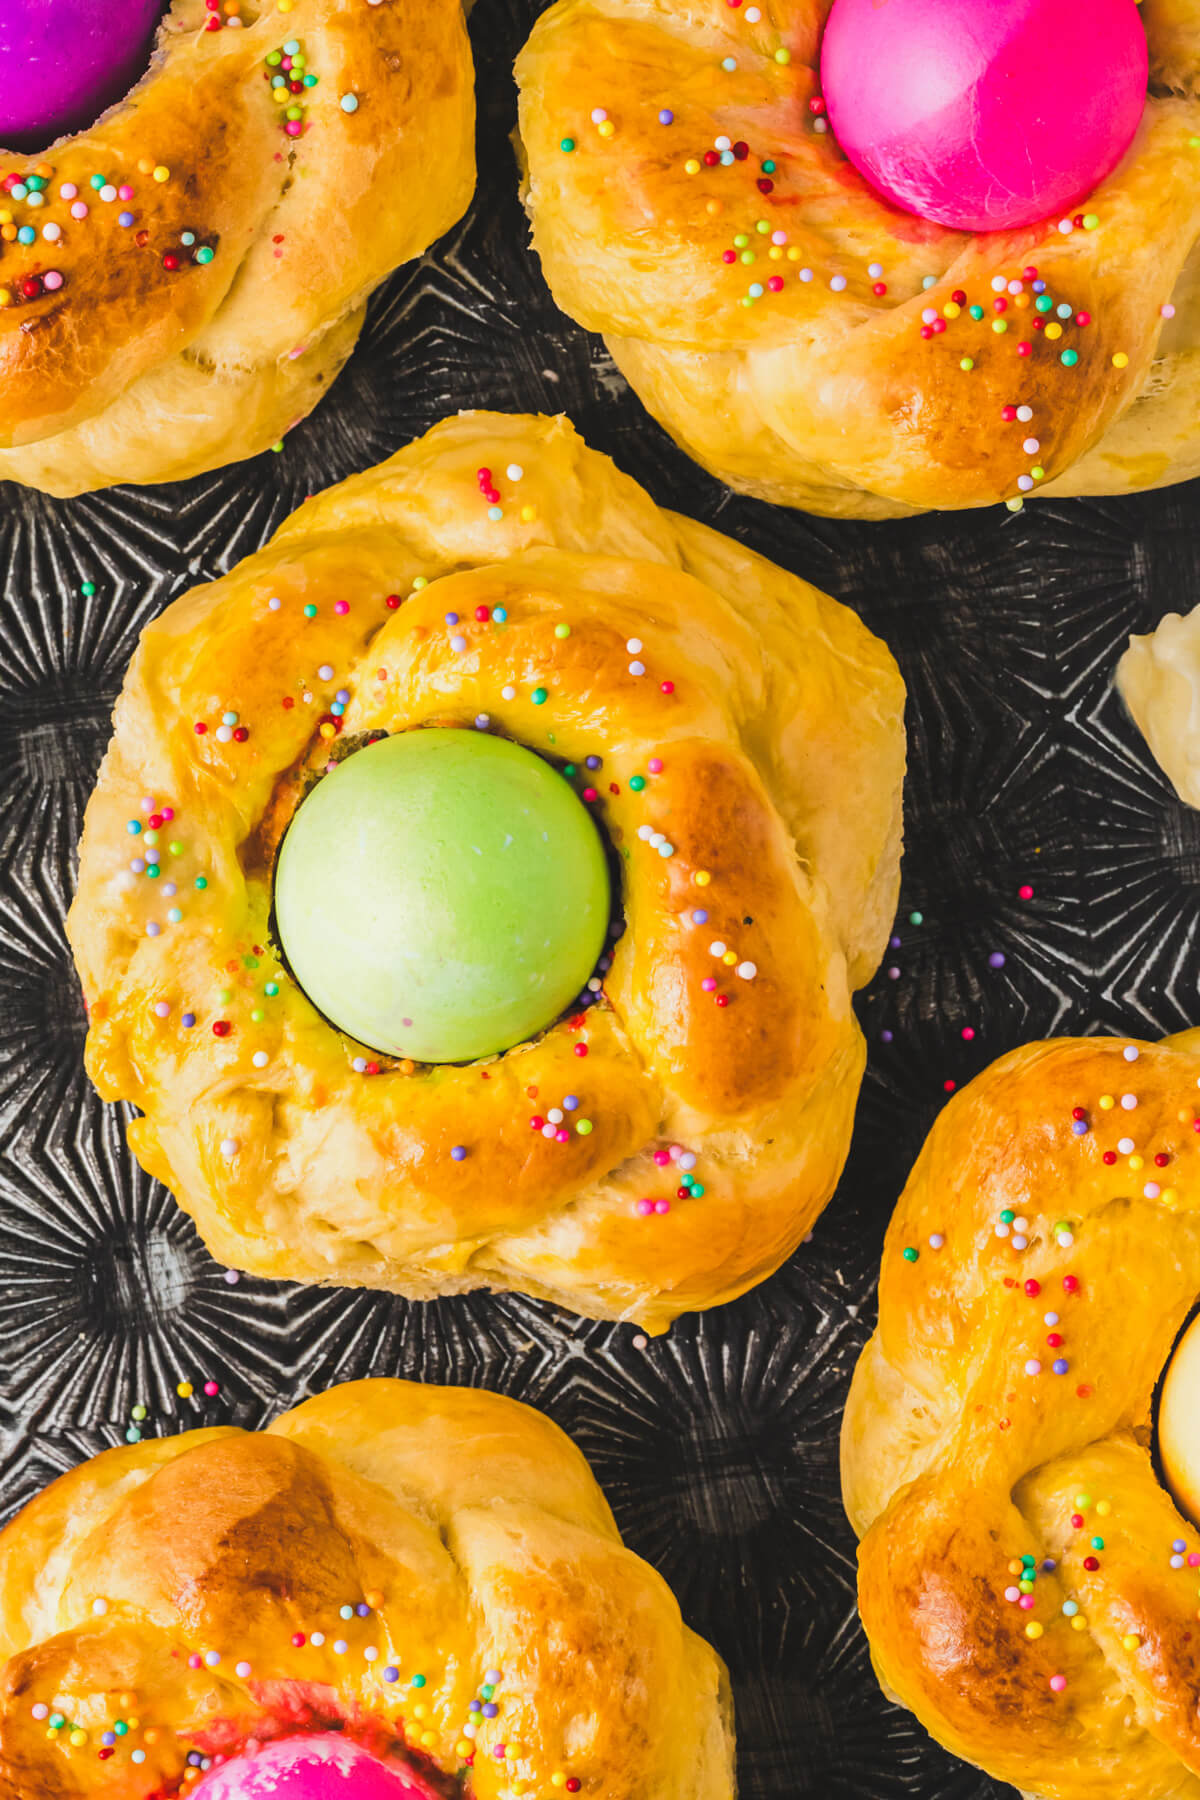 A group of golden baked Italian Easter Bread filled with brightly coloured Easter eggs on a baking sheet.